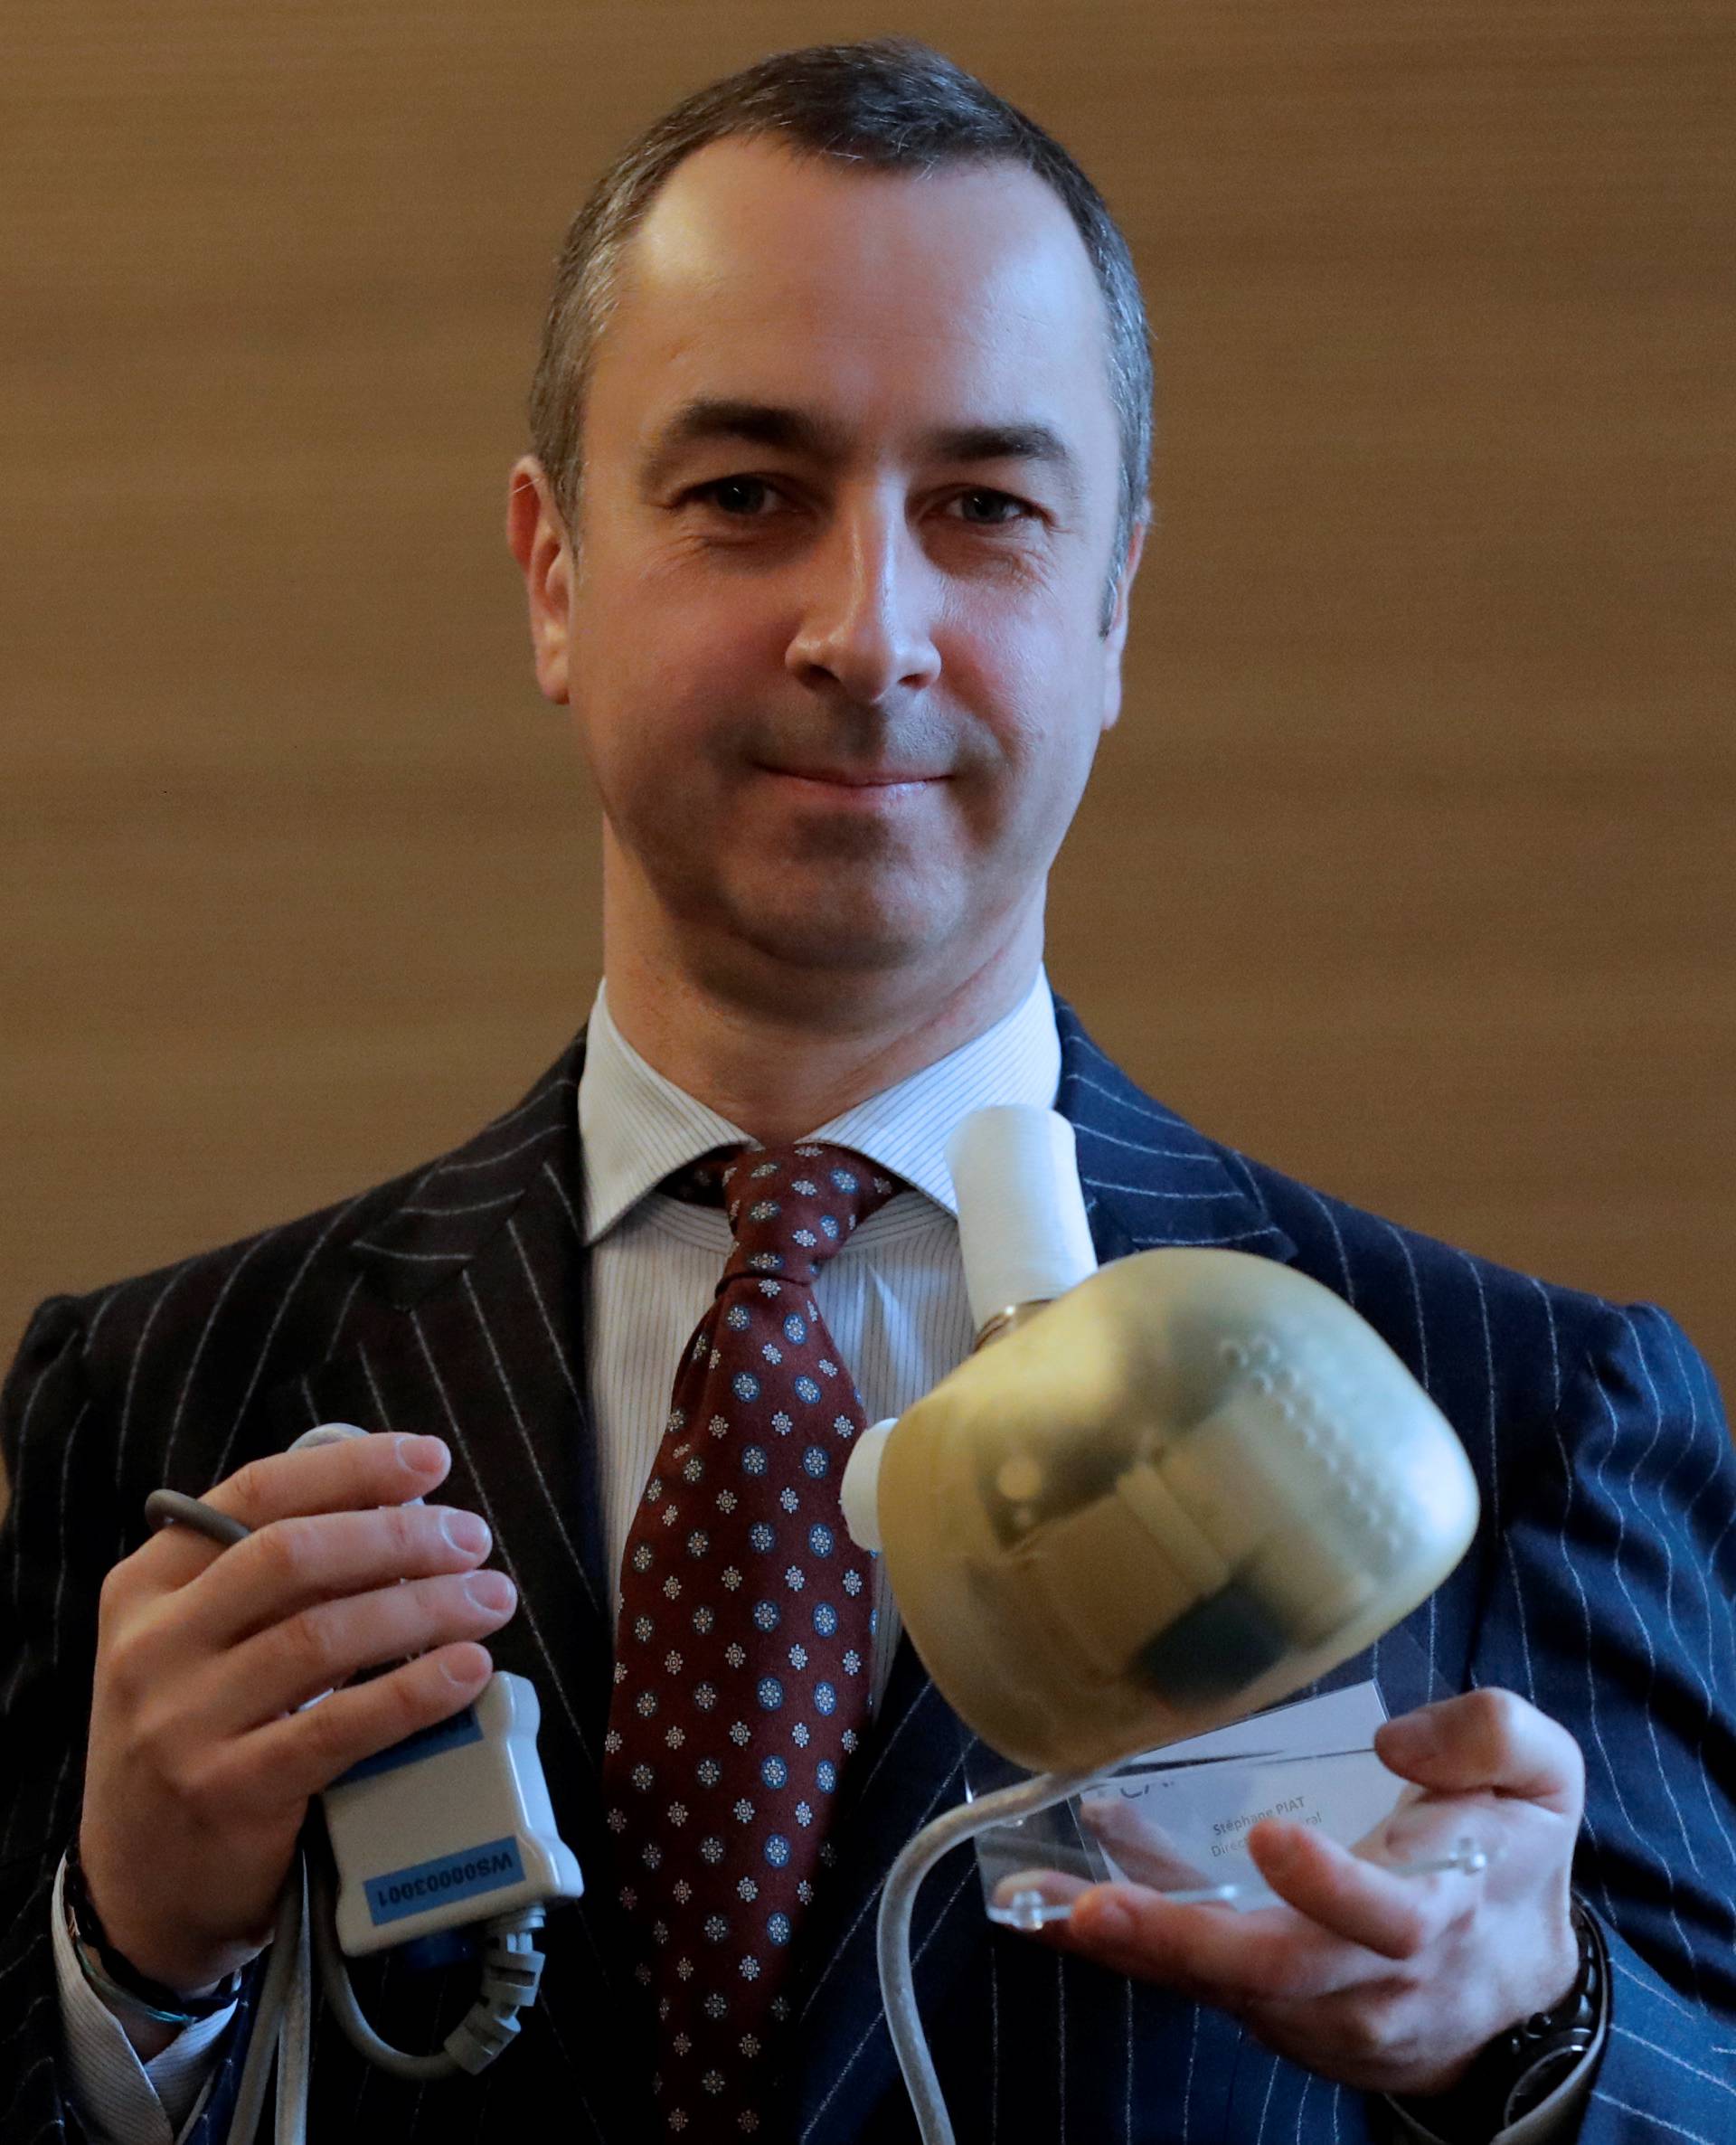 Carmat Chief Executive Officer Stephane Piat holds an artificial heart as he poses after the company's news conference in Paris